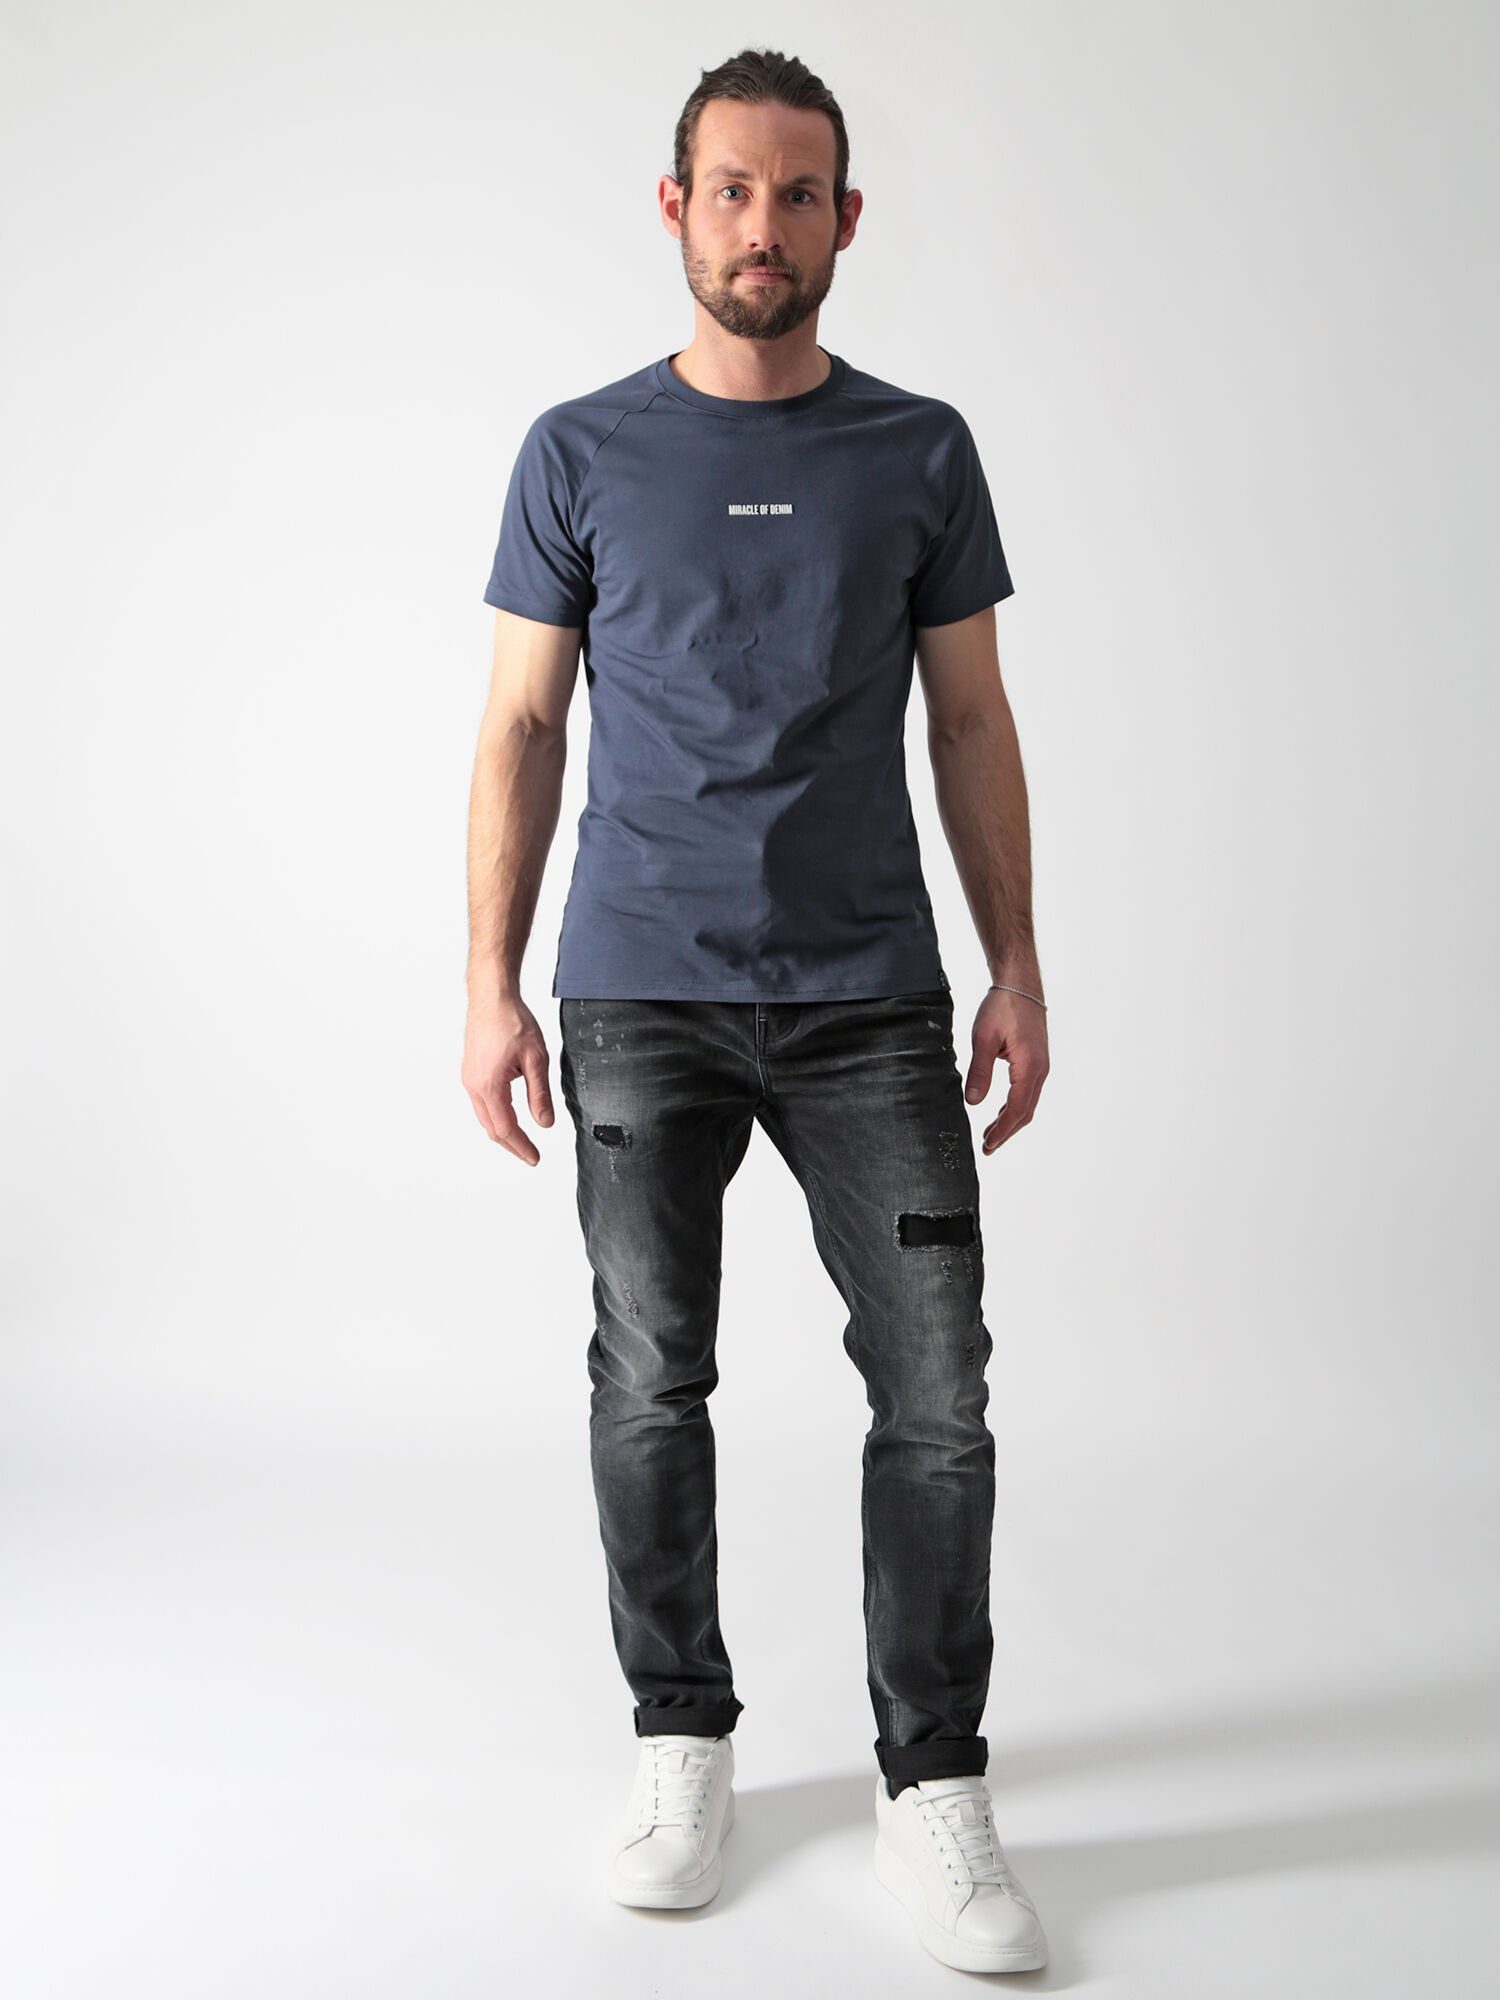 Tapered-fit-Jeans of Tragekomfort Black Angenehmer Alvin Miracle Denim Noughty